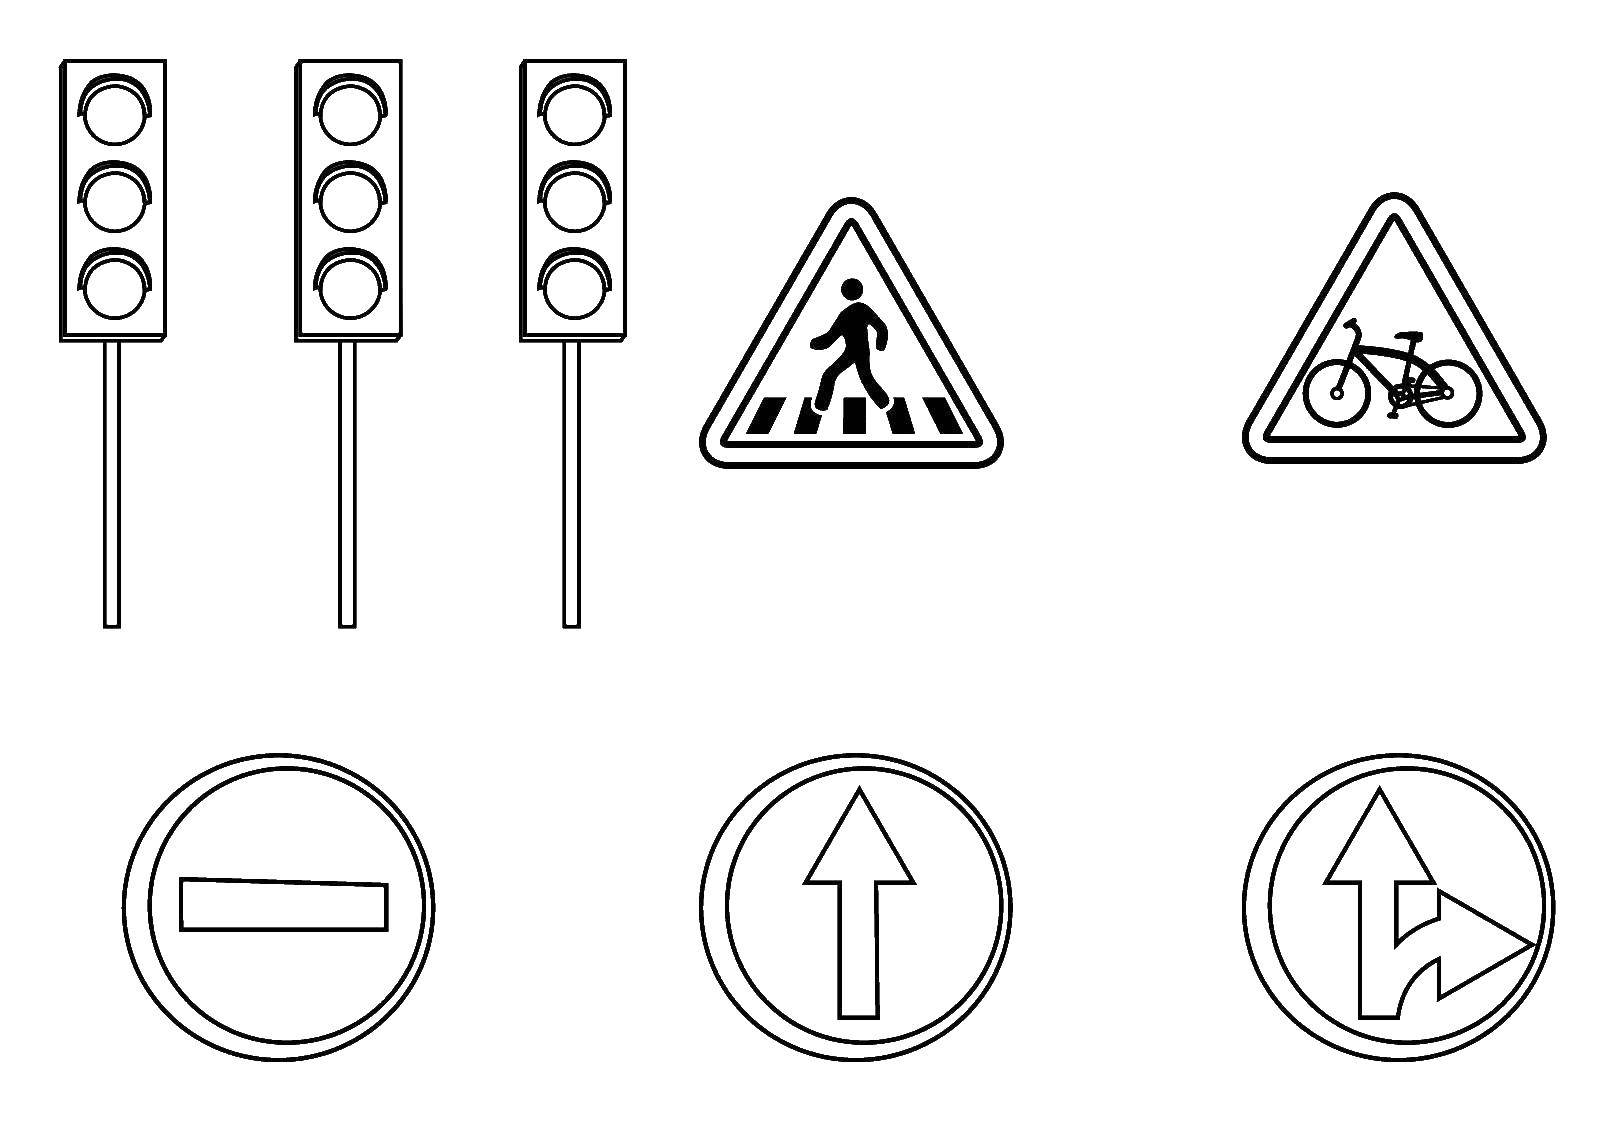 Coloring Road signs and traffic lights to cut. Category rules of the road. Tags:  traffic sign, traffic light.